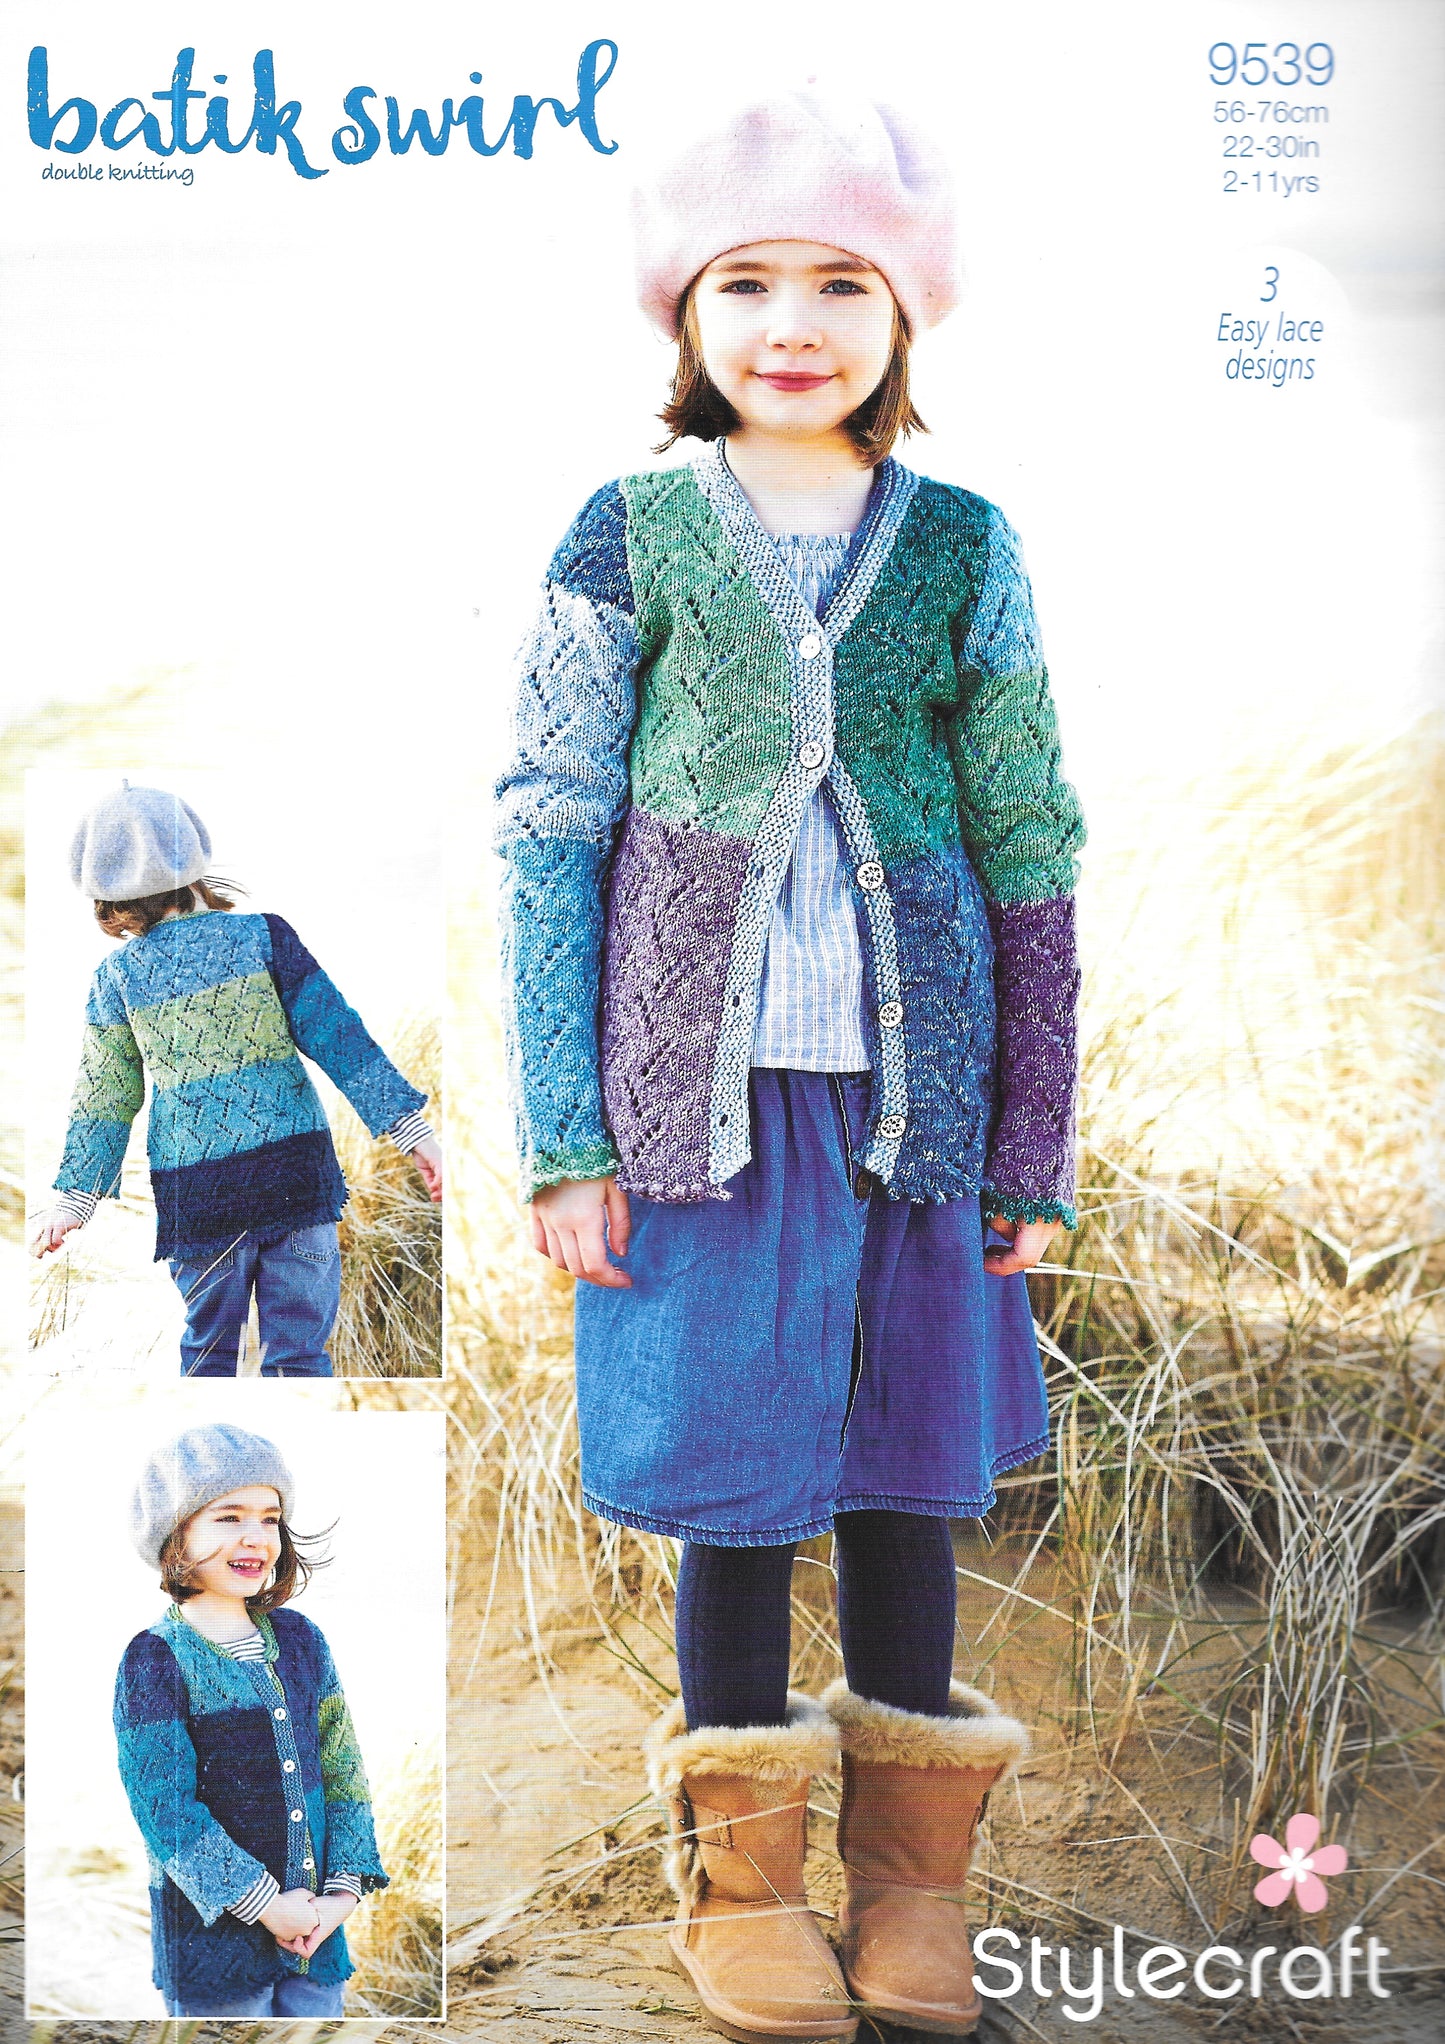 9539 Stylecraft knitting pattern. Child's cardigans and mittens.  Double Knitting